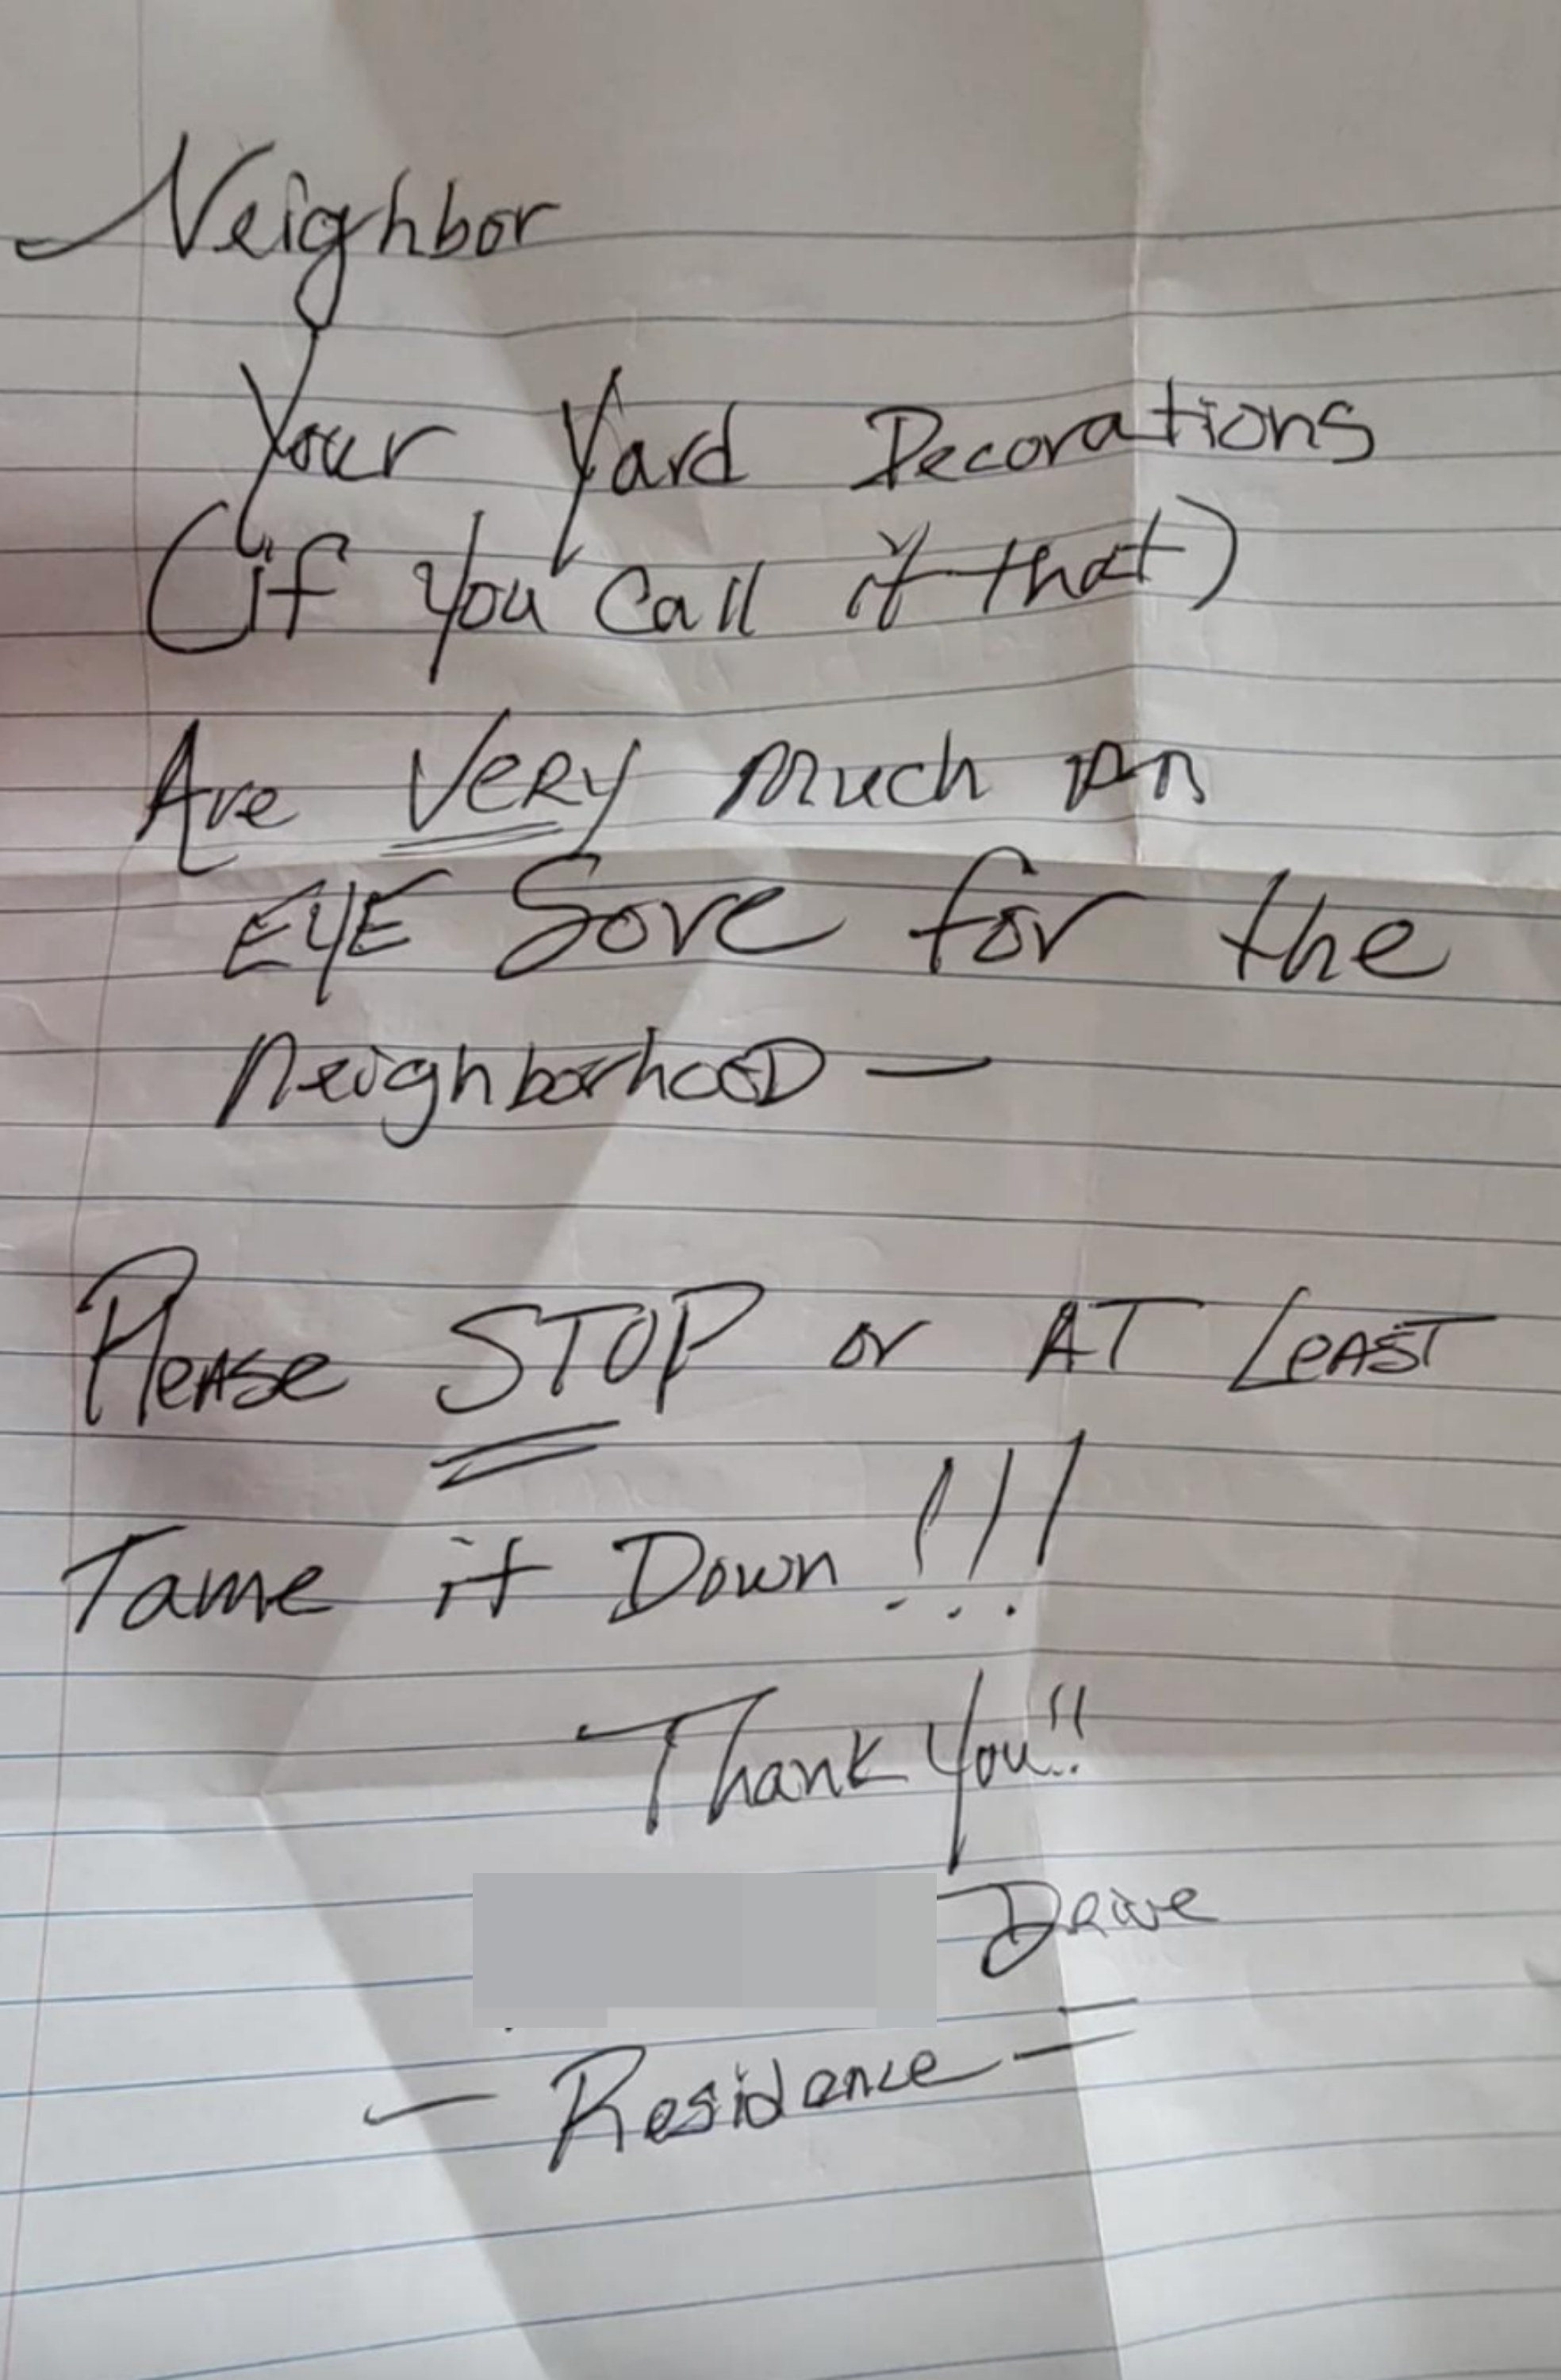 A note telling someone their lawn decorations are an eye sore and asking that they be taken down